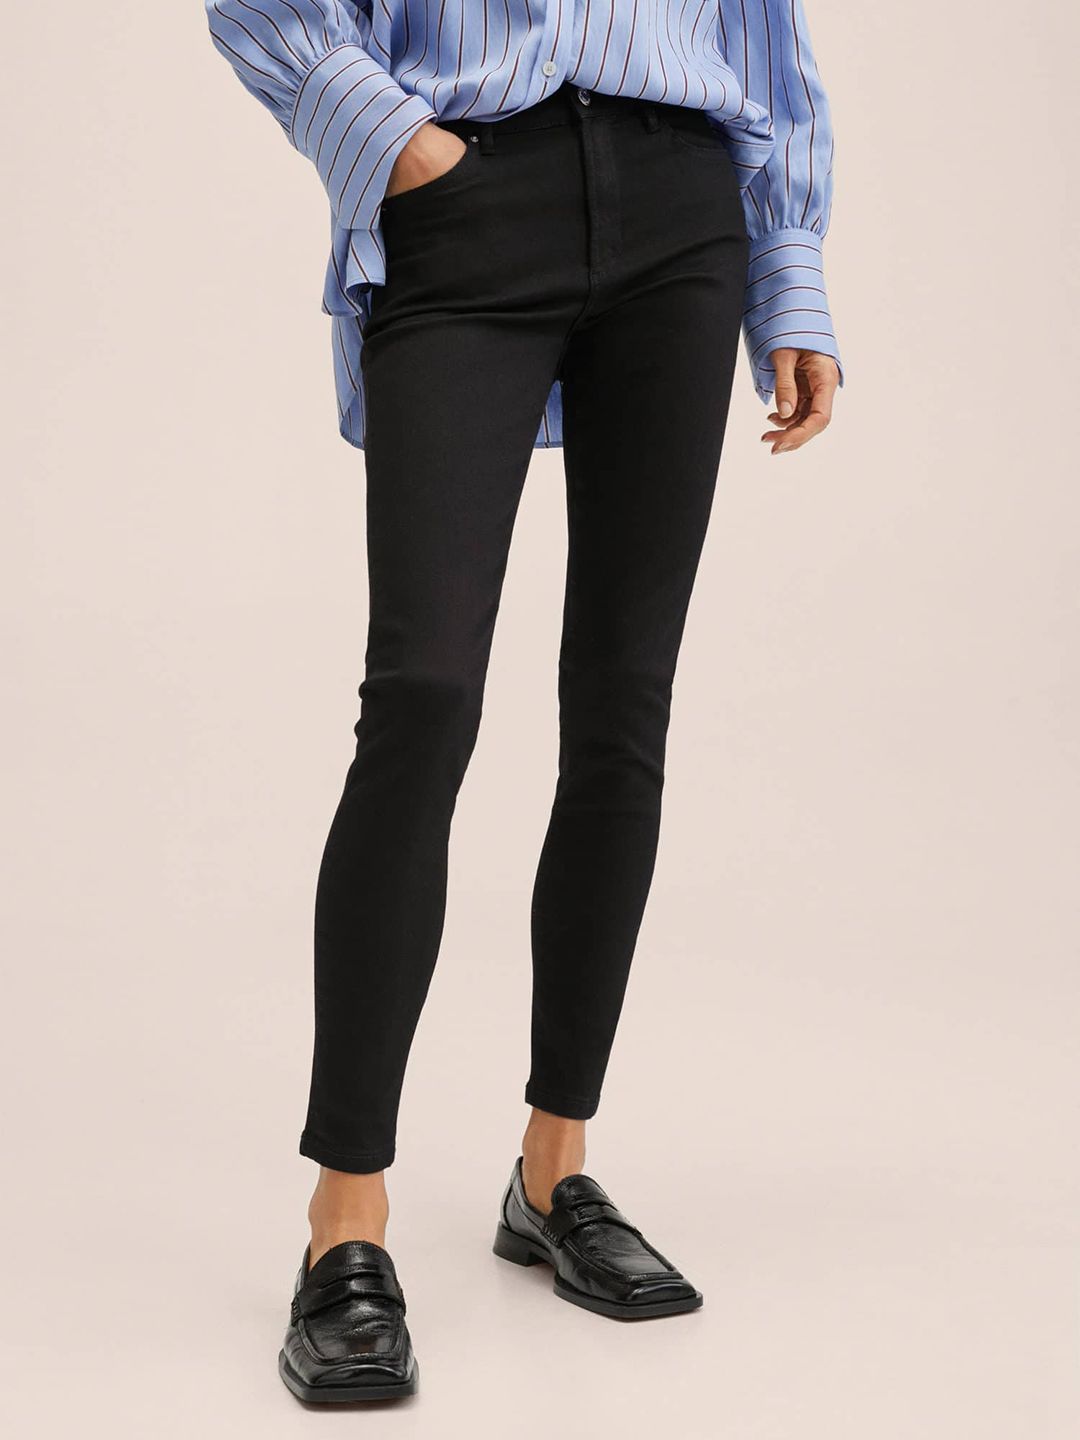 MANGO Women Black Skinny Fit Stretchable Jeans Price in India